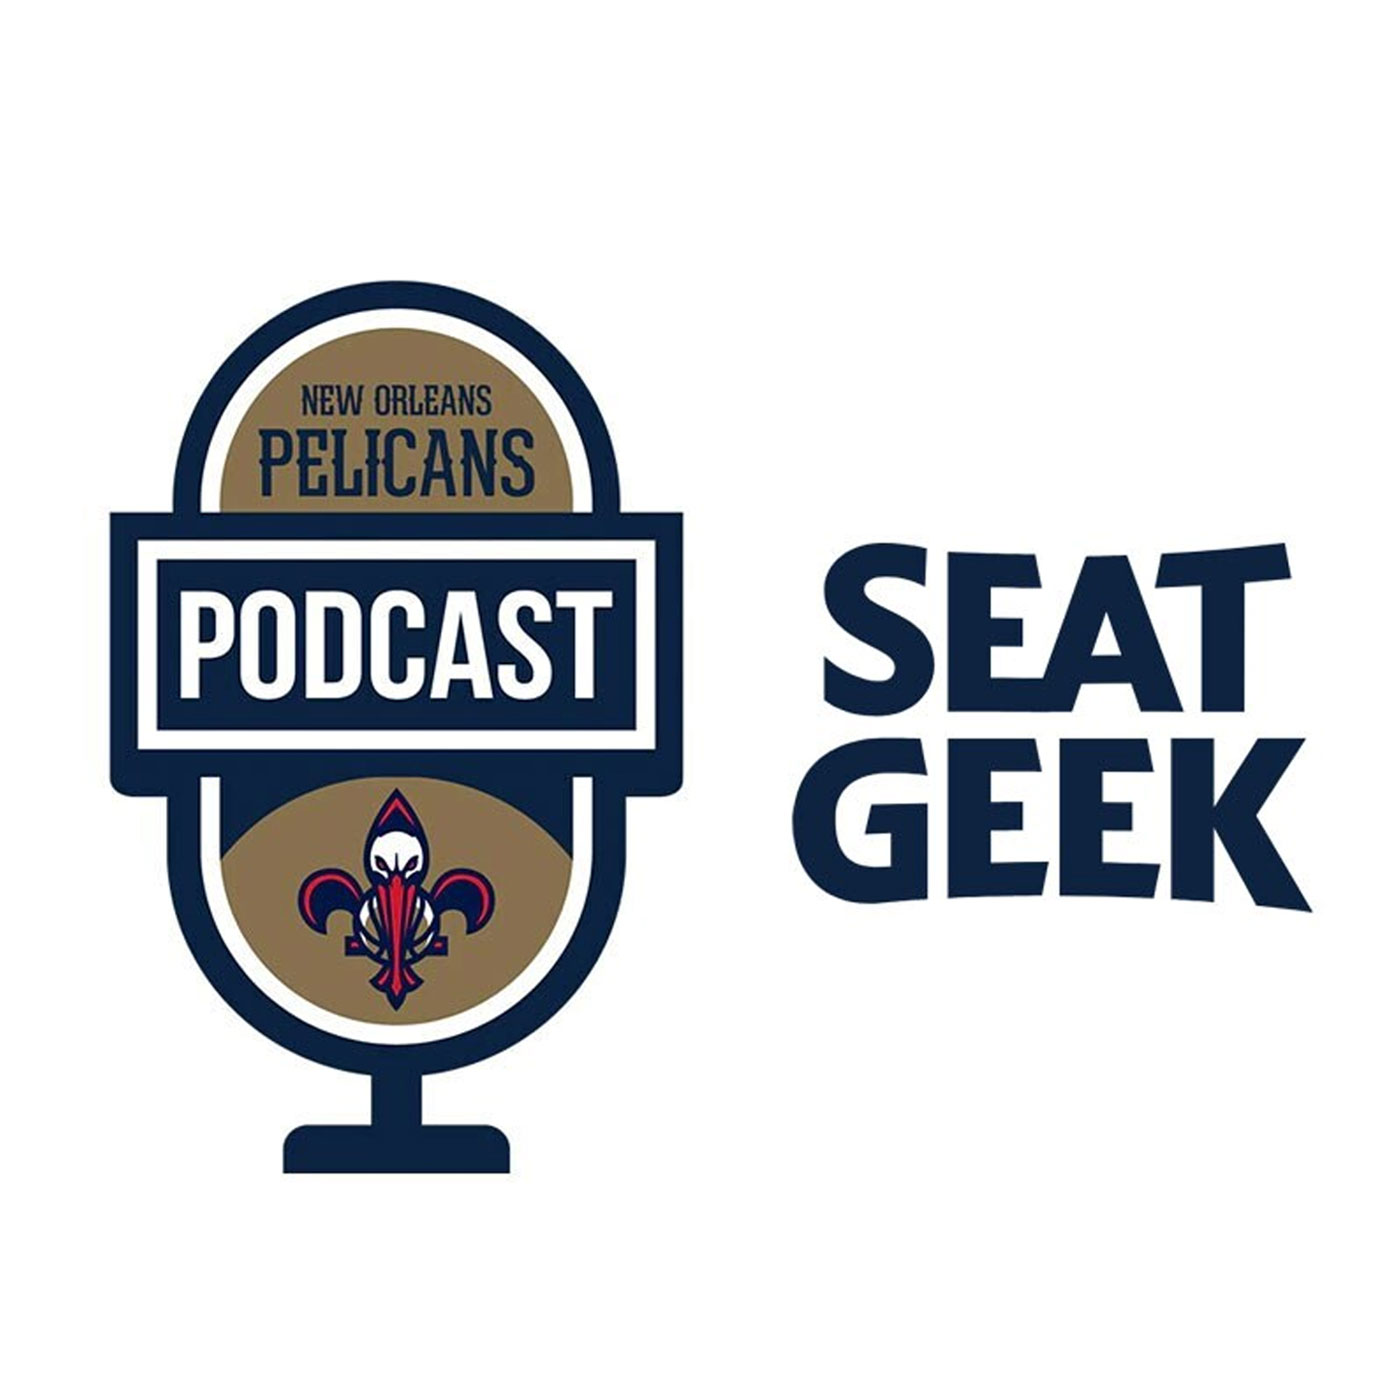 Kyle Draper on the New Orleans Pelicans Podcast presented by SeatGeek - November 3, 2021